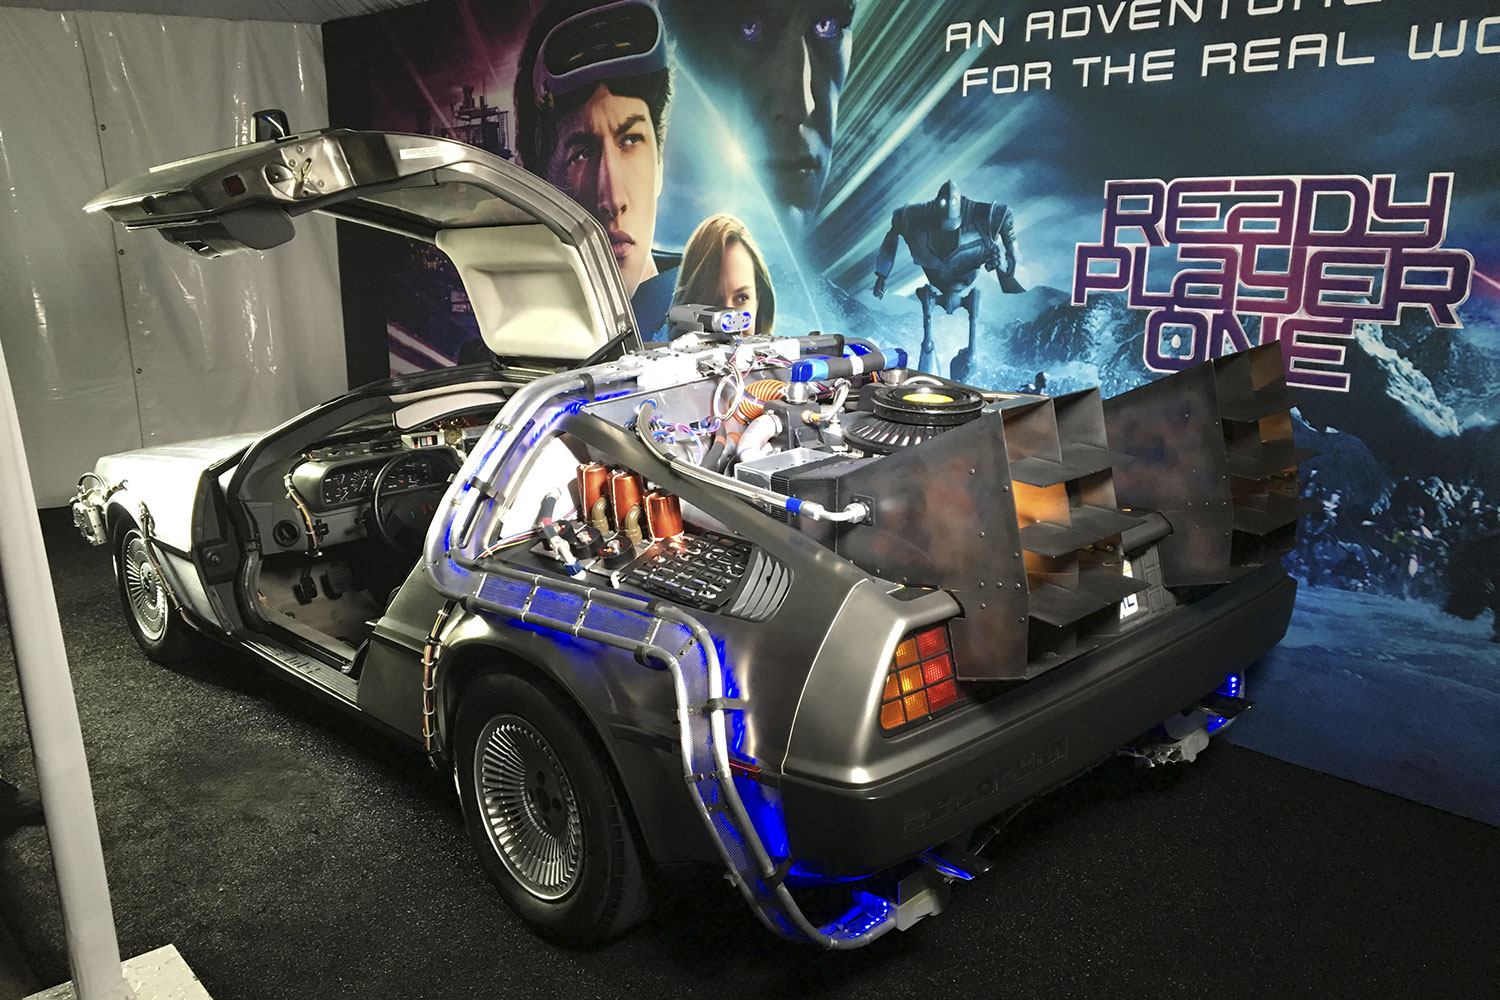 Inside the 'Ready Player One' Challenge in L.A.: Details